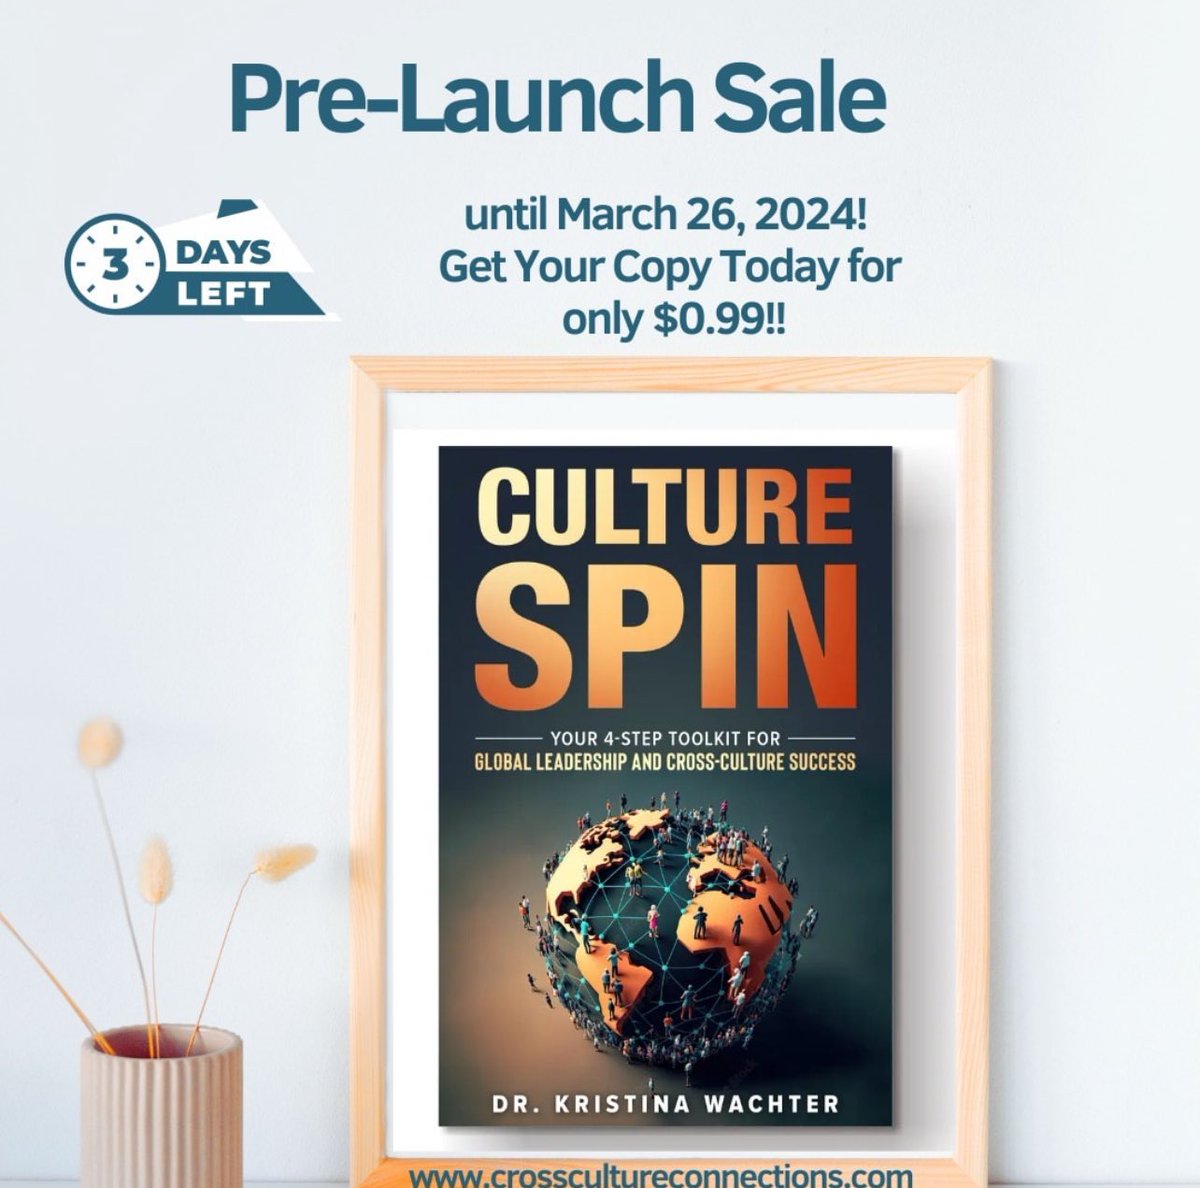 ONLY 3 DAYS REMAINING! The #CrossCultureConnections #CulturalSPINMethod presale is down to 3 days! Don’t miss your opportunity to grab the premier guide to increasing your #global #leadership and #cross-culture success! Visit crosscultureconnections.com today before the sale ends!